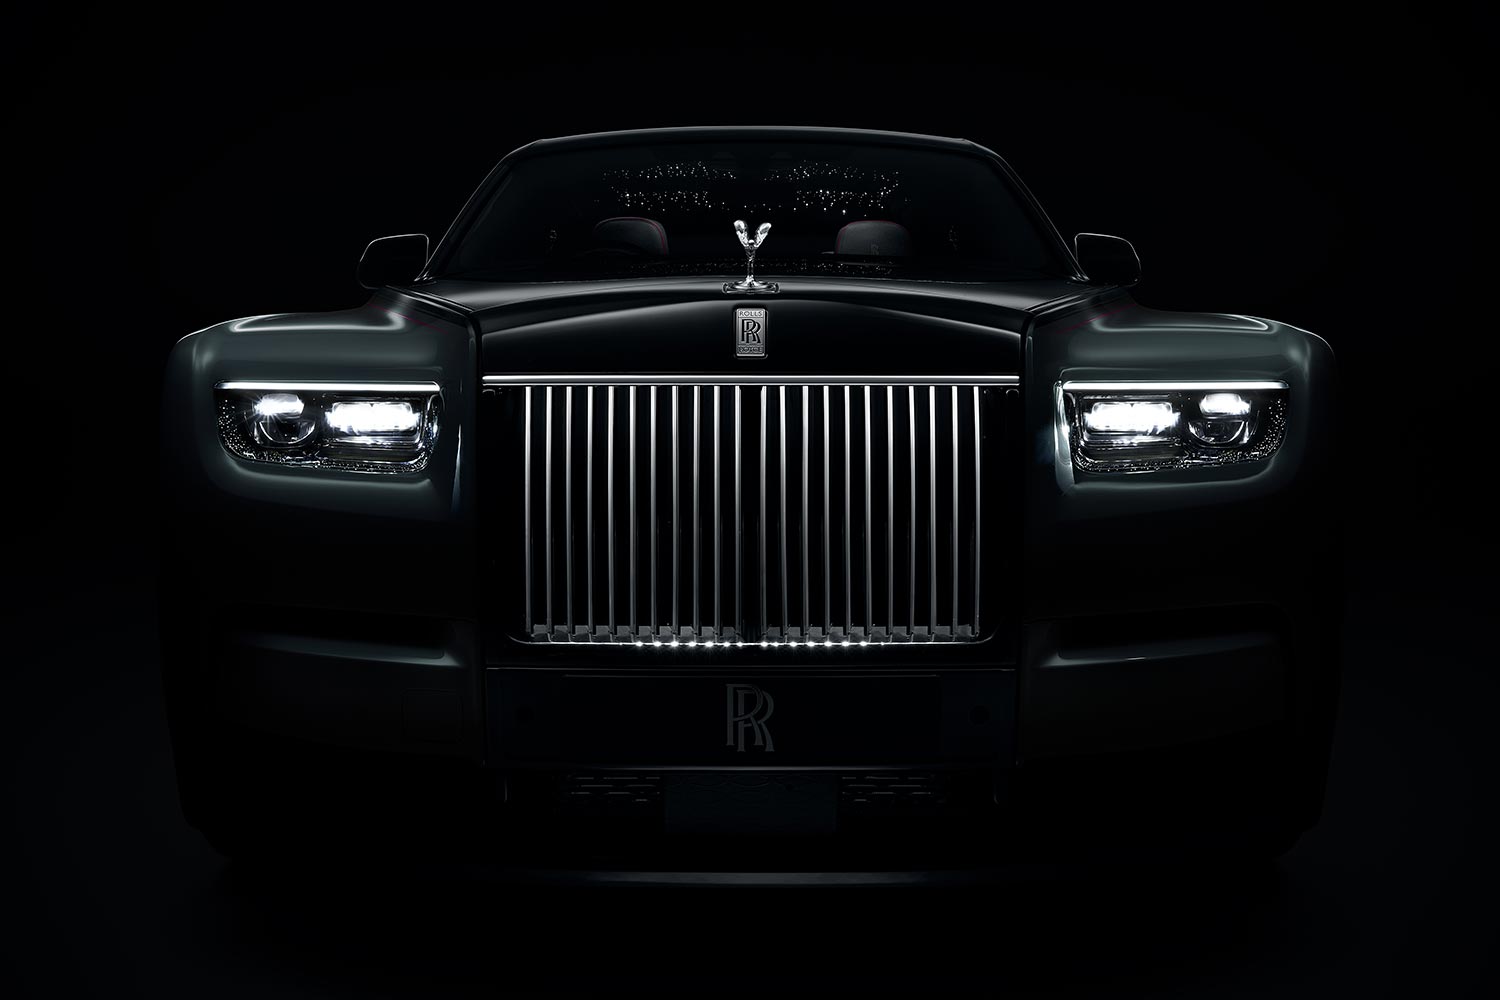 RollsRoyce Motor Cars  The icon for icons The creation of RollsRoyce  Phantom is the creation of legacy  Facebook